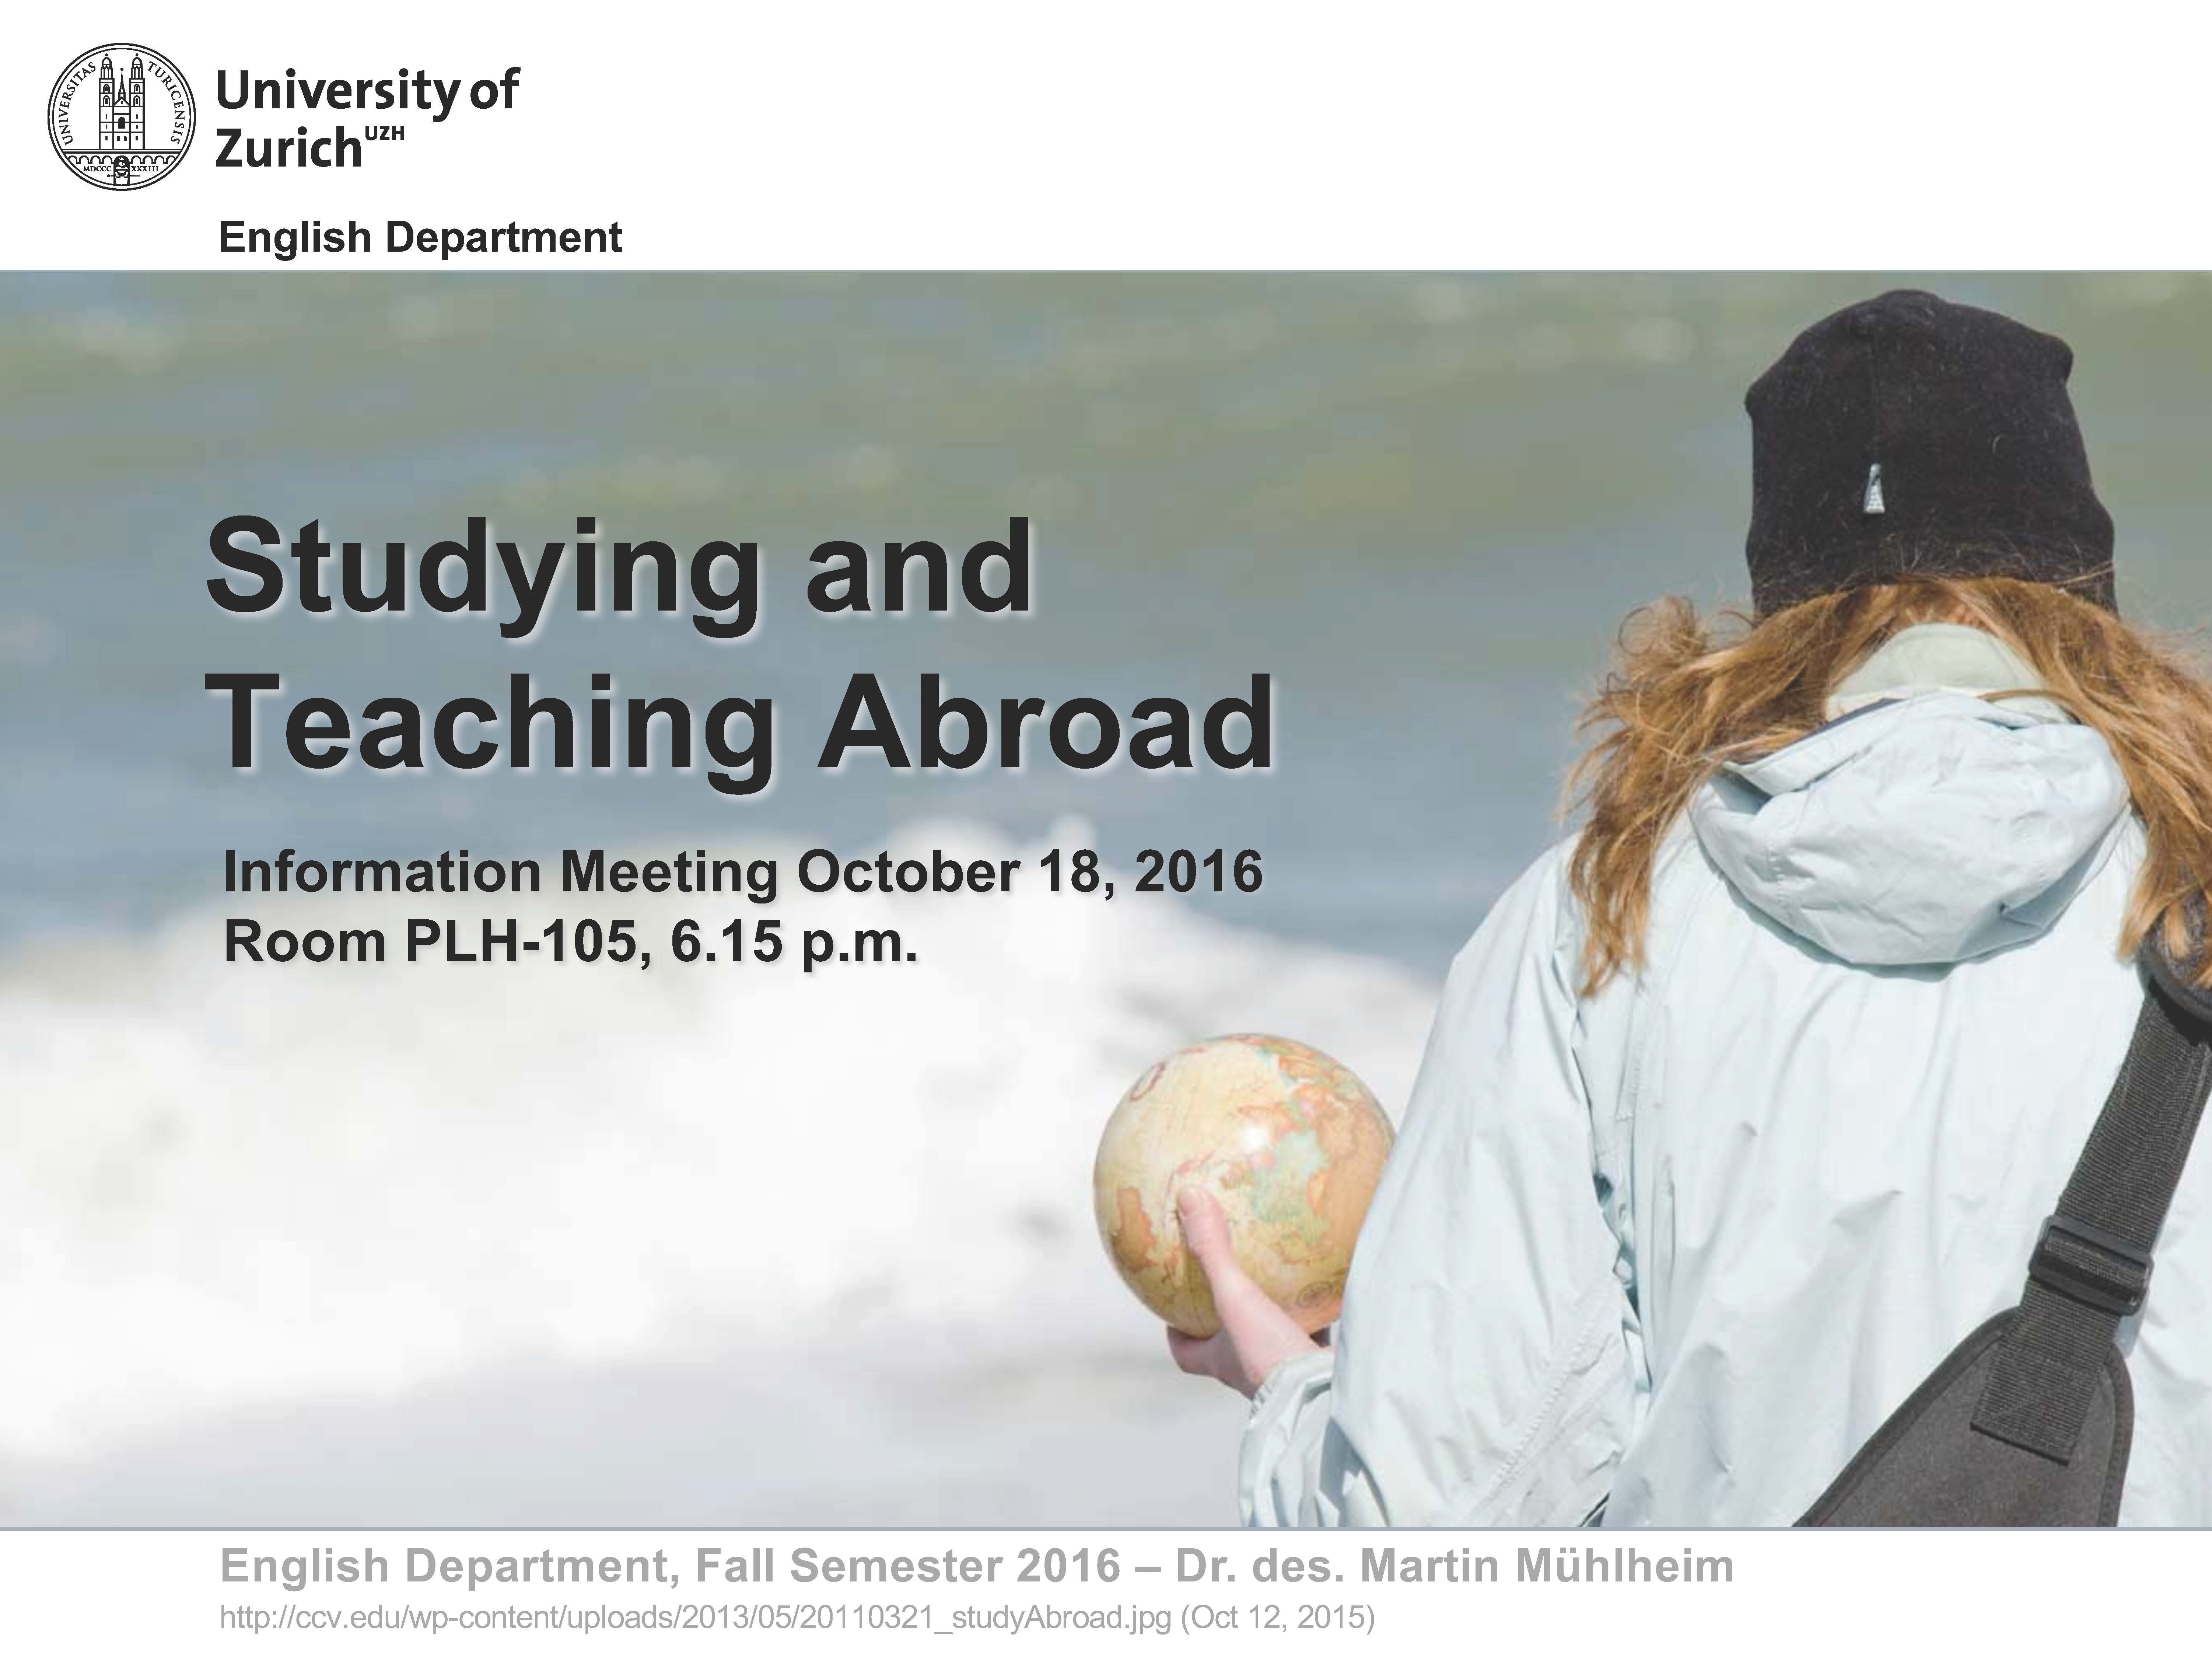 Studying and Teaching Abroad Information Meeting 2016